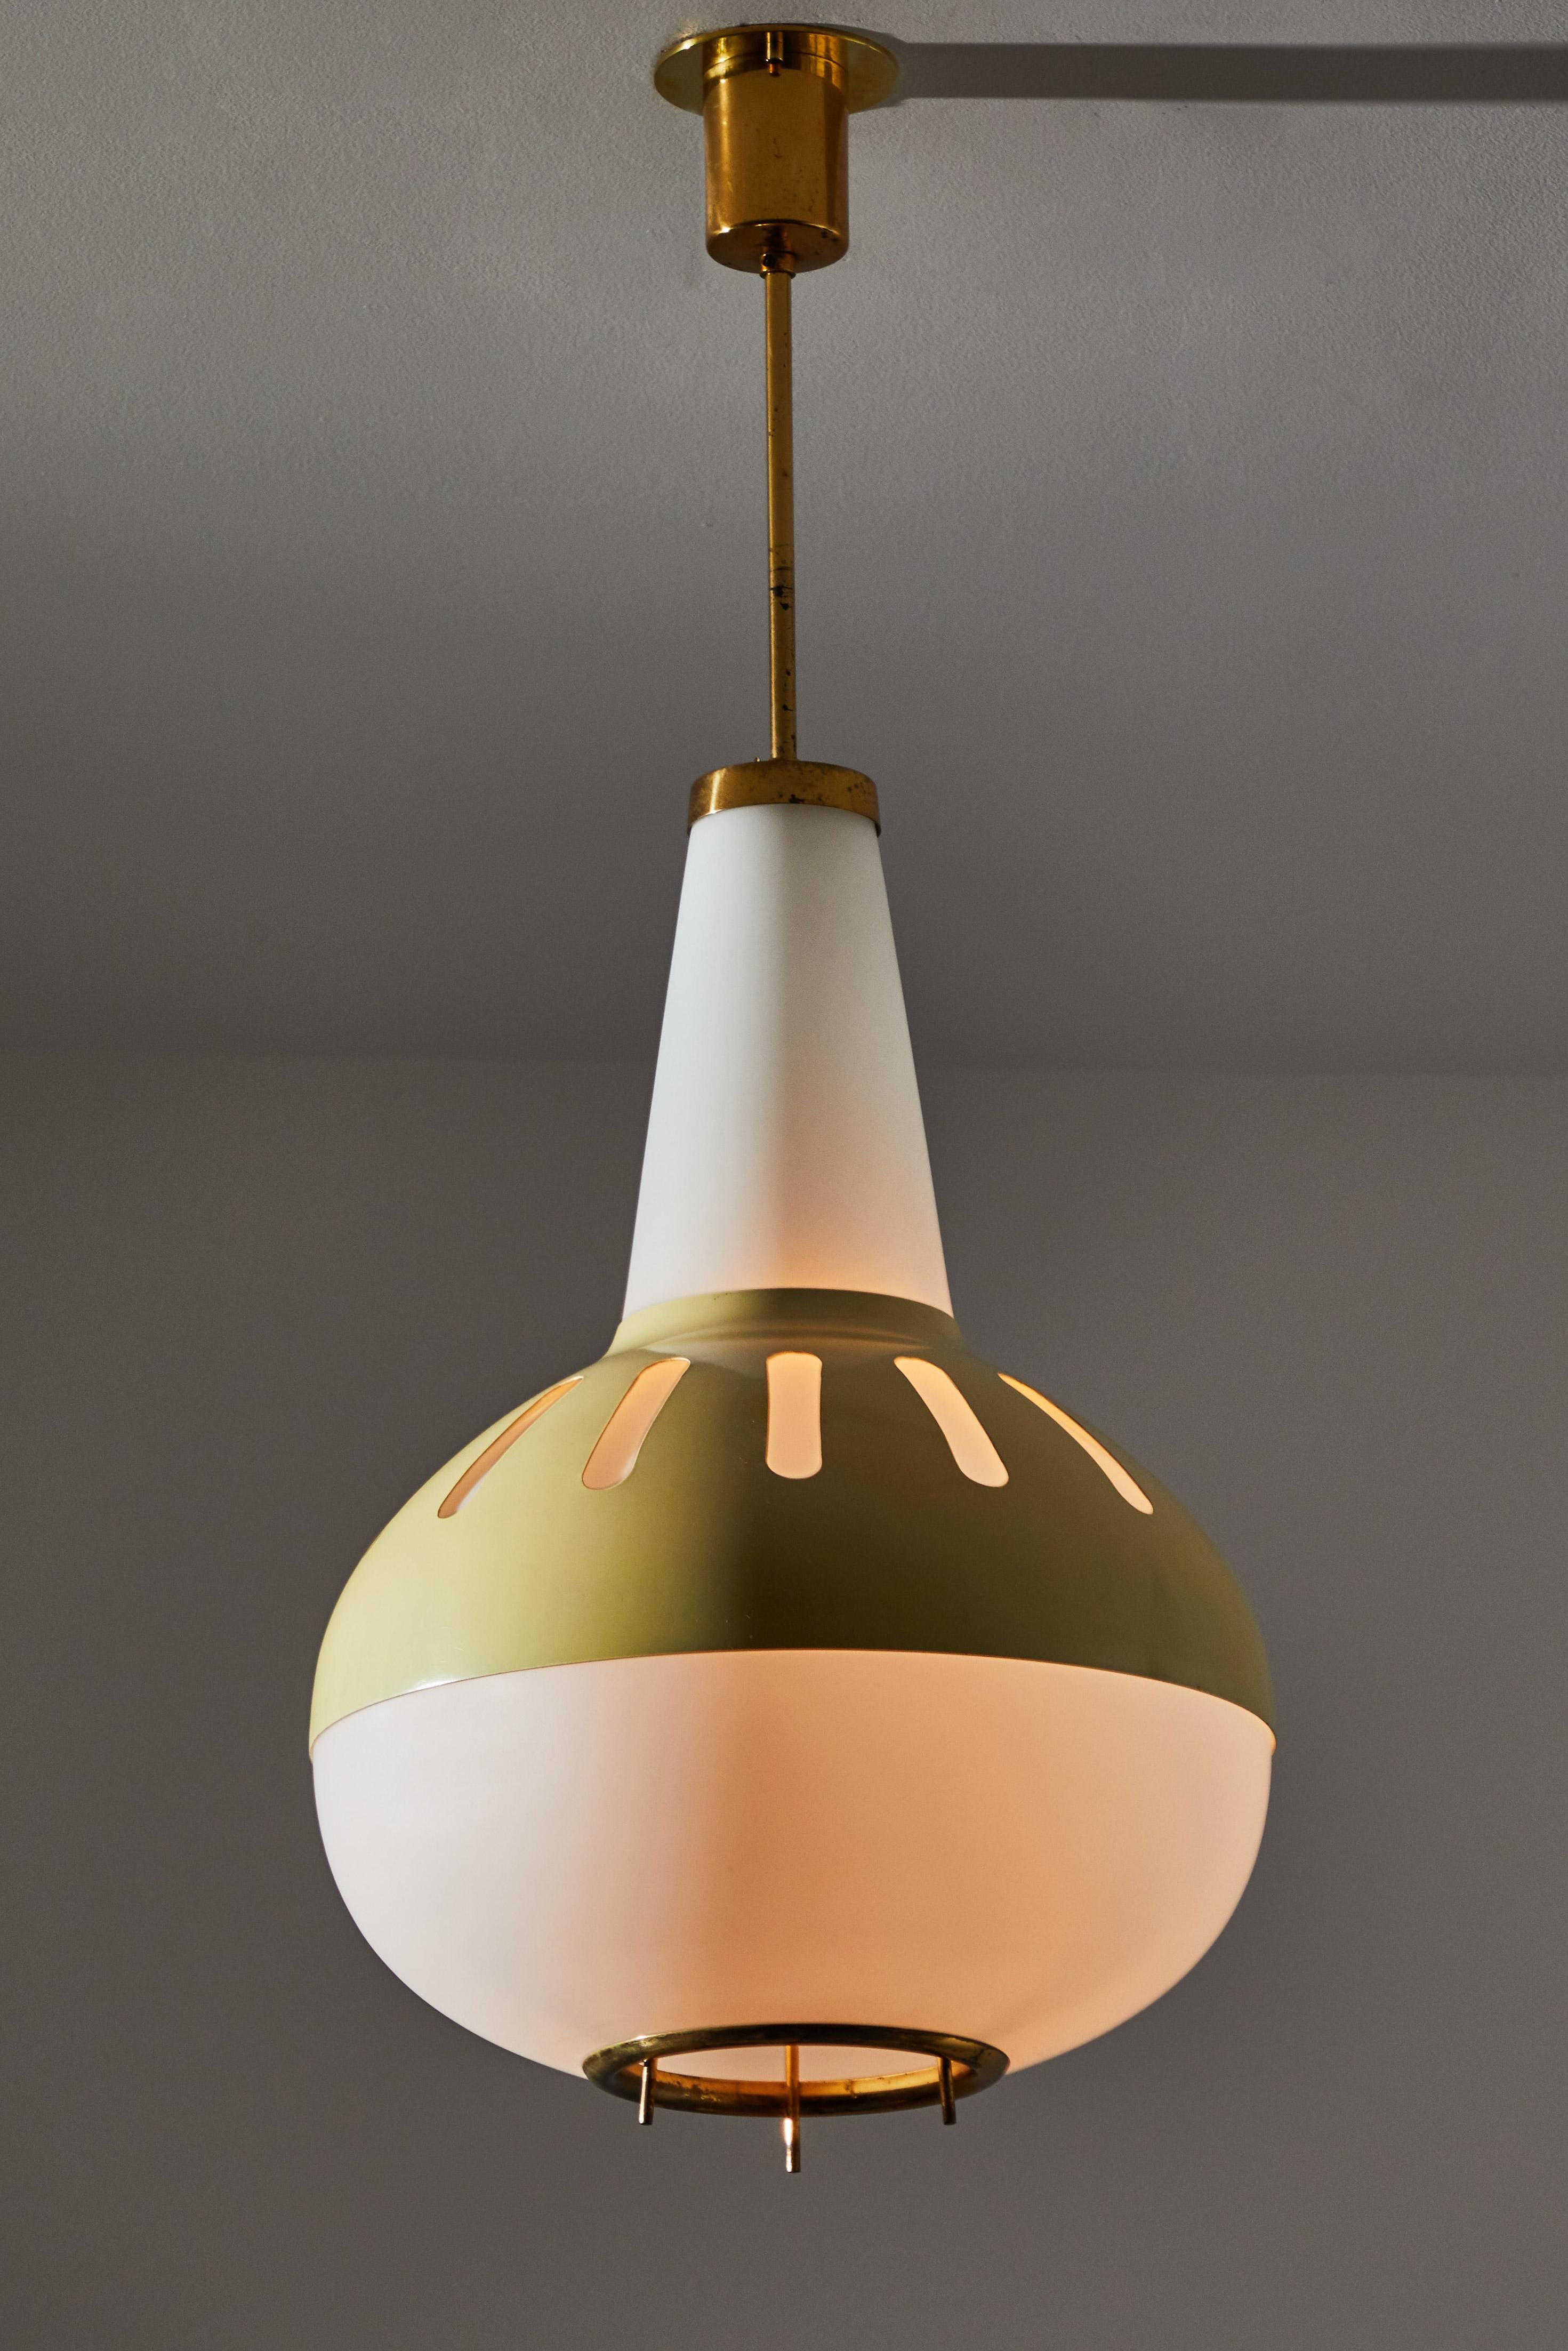 Model 1954 pendant by Max Ingrand for Fontana Arte. Designed and manufactured in Italy, late 1950s. Enameled metal armature with original paint, brass hardware and brushed satin glass diffuser. Rewired for U.S. junction boxes. Custom brass ceiling